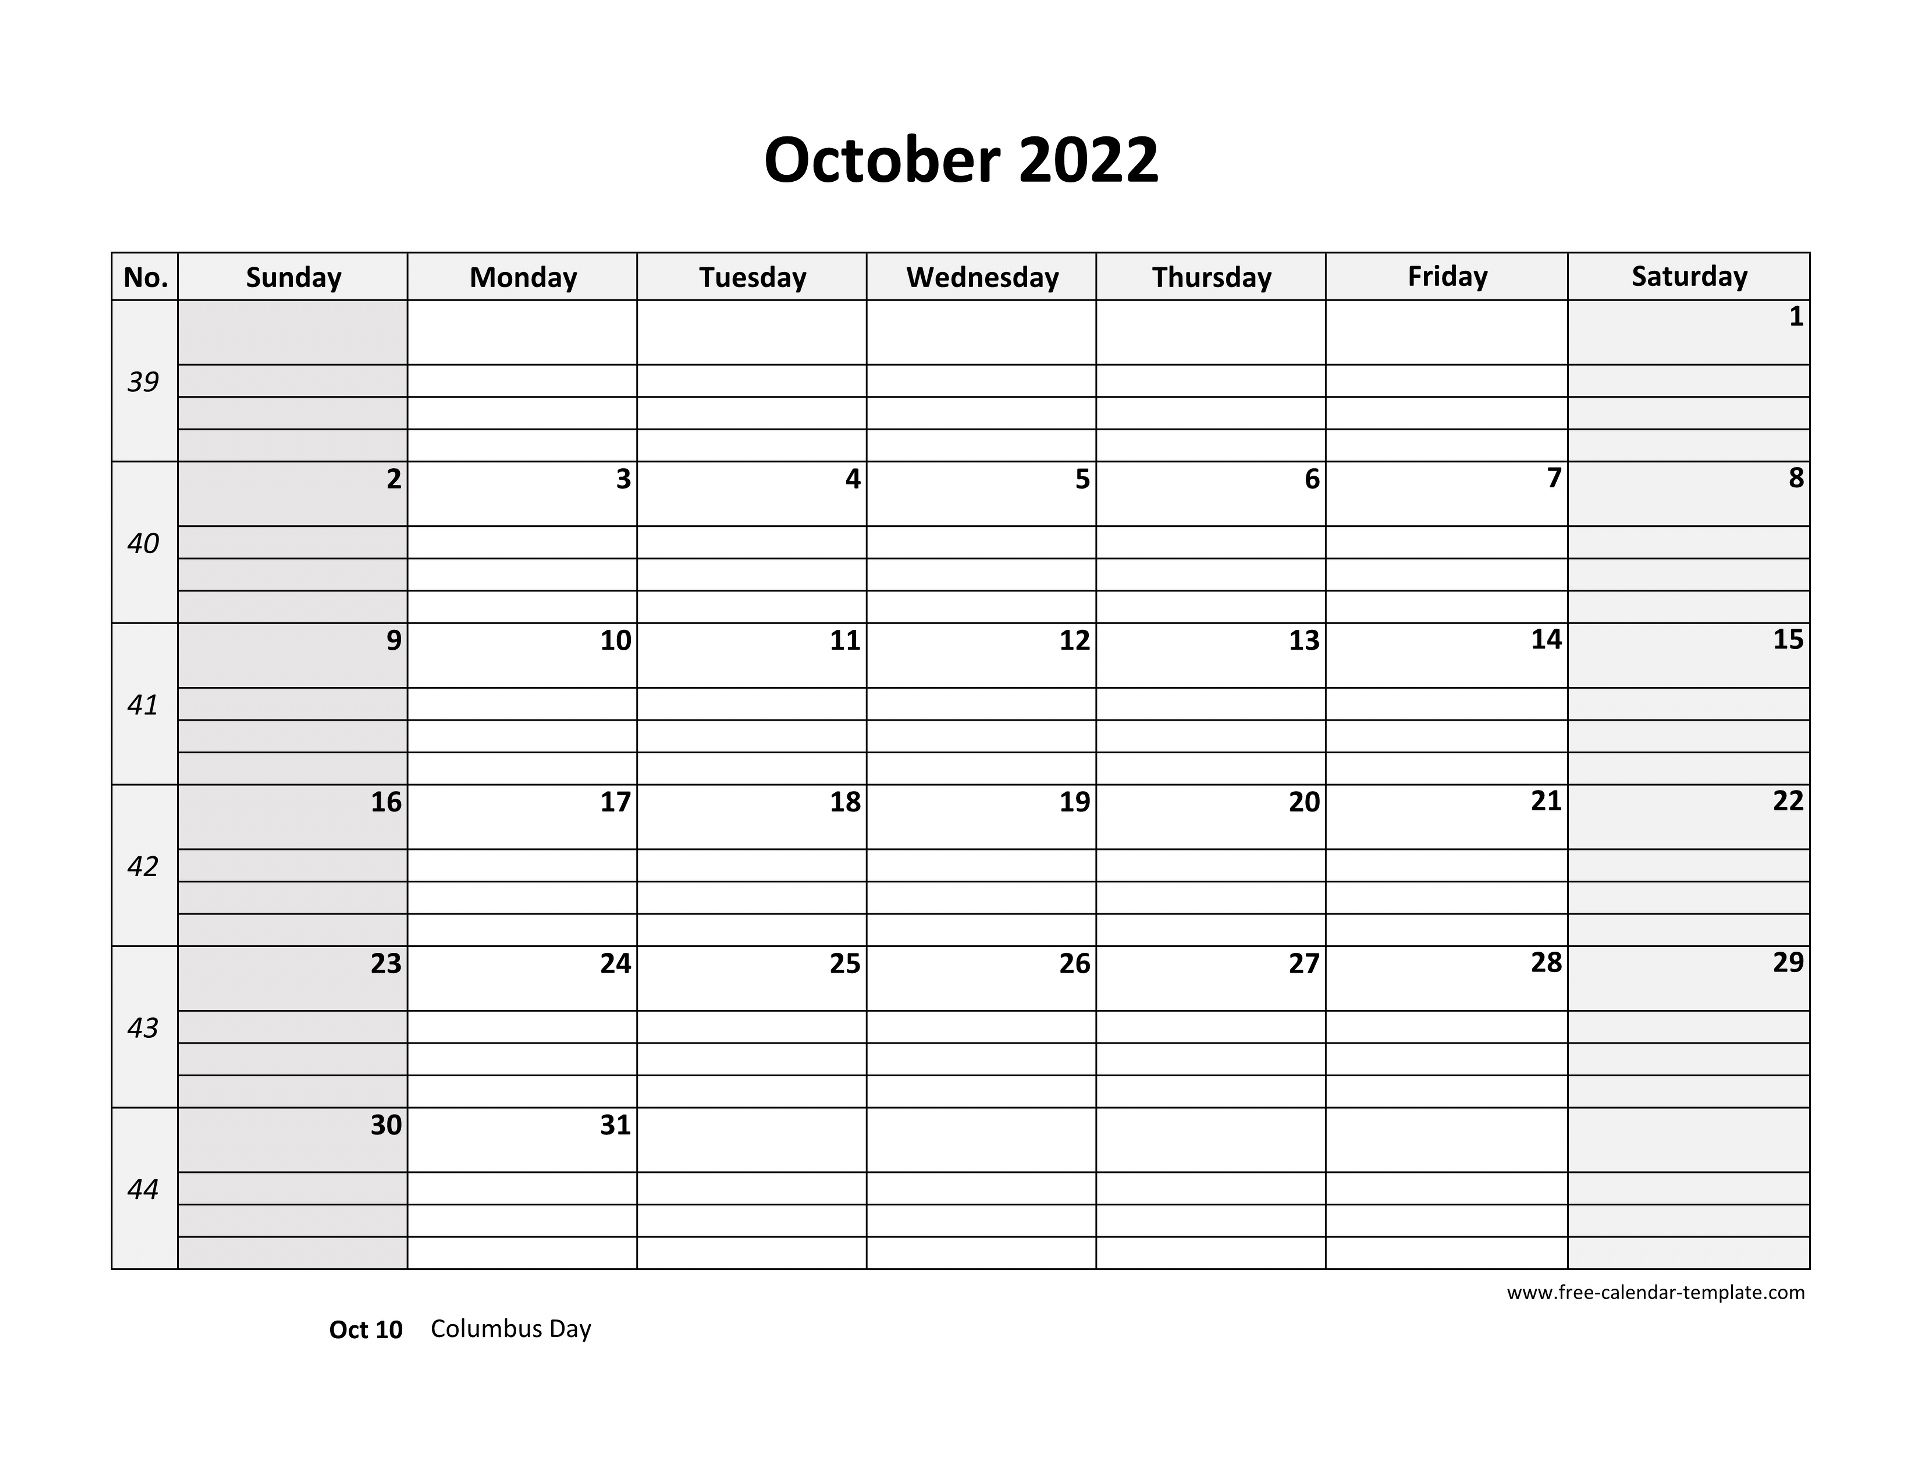 october-2022-calendar-free-printable-with-grid-lines-designed